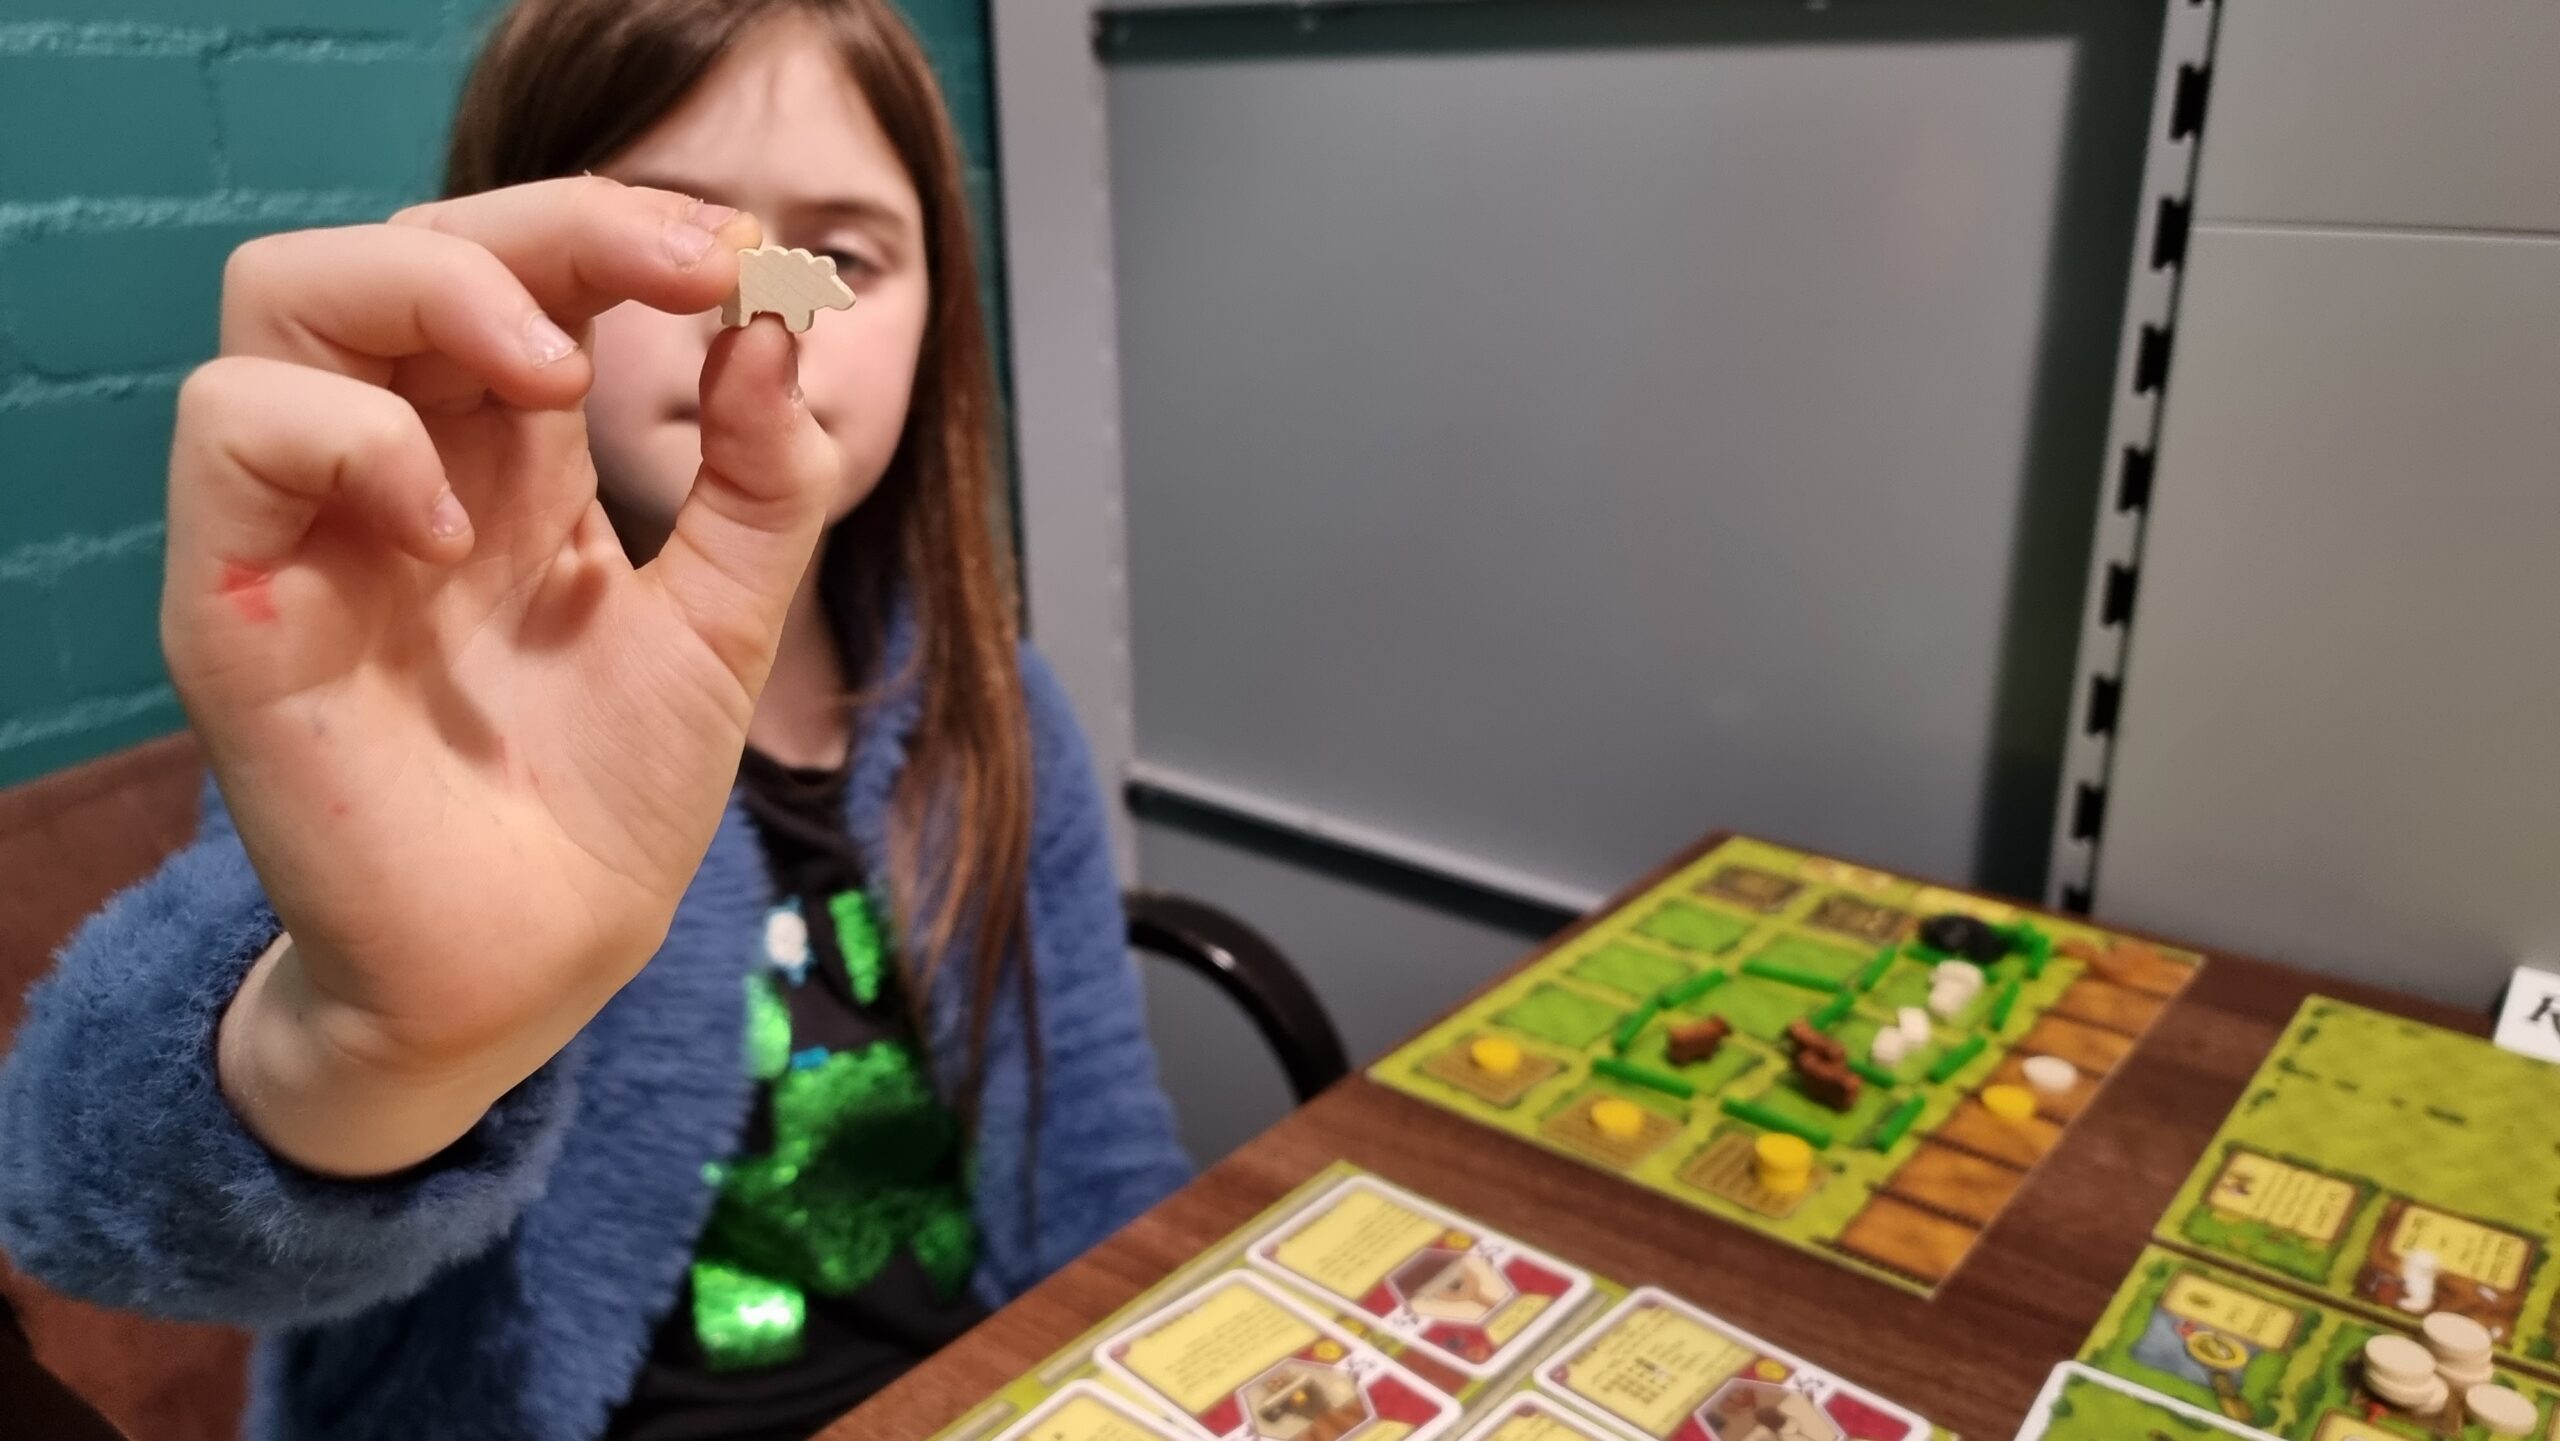 A girl, sat in front of an Agricola farmyard board, holds up a "sheeple" (small wooden sheep game piece) for the camera.